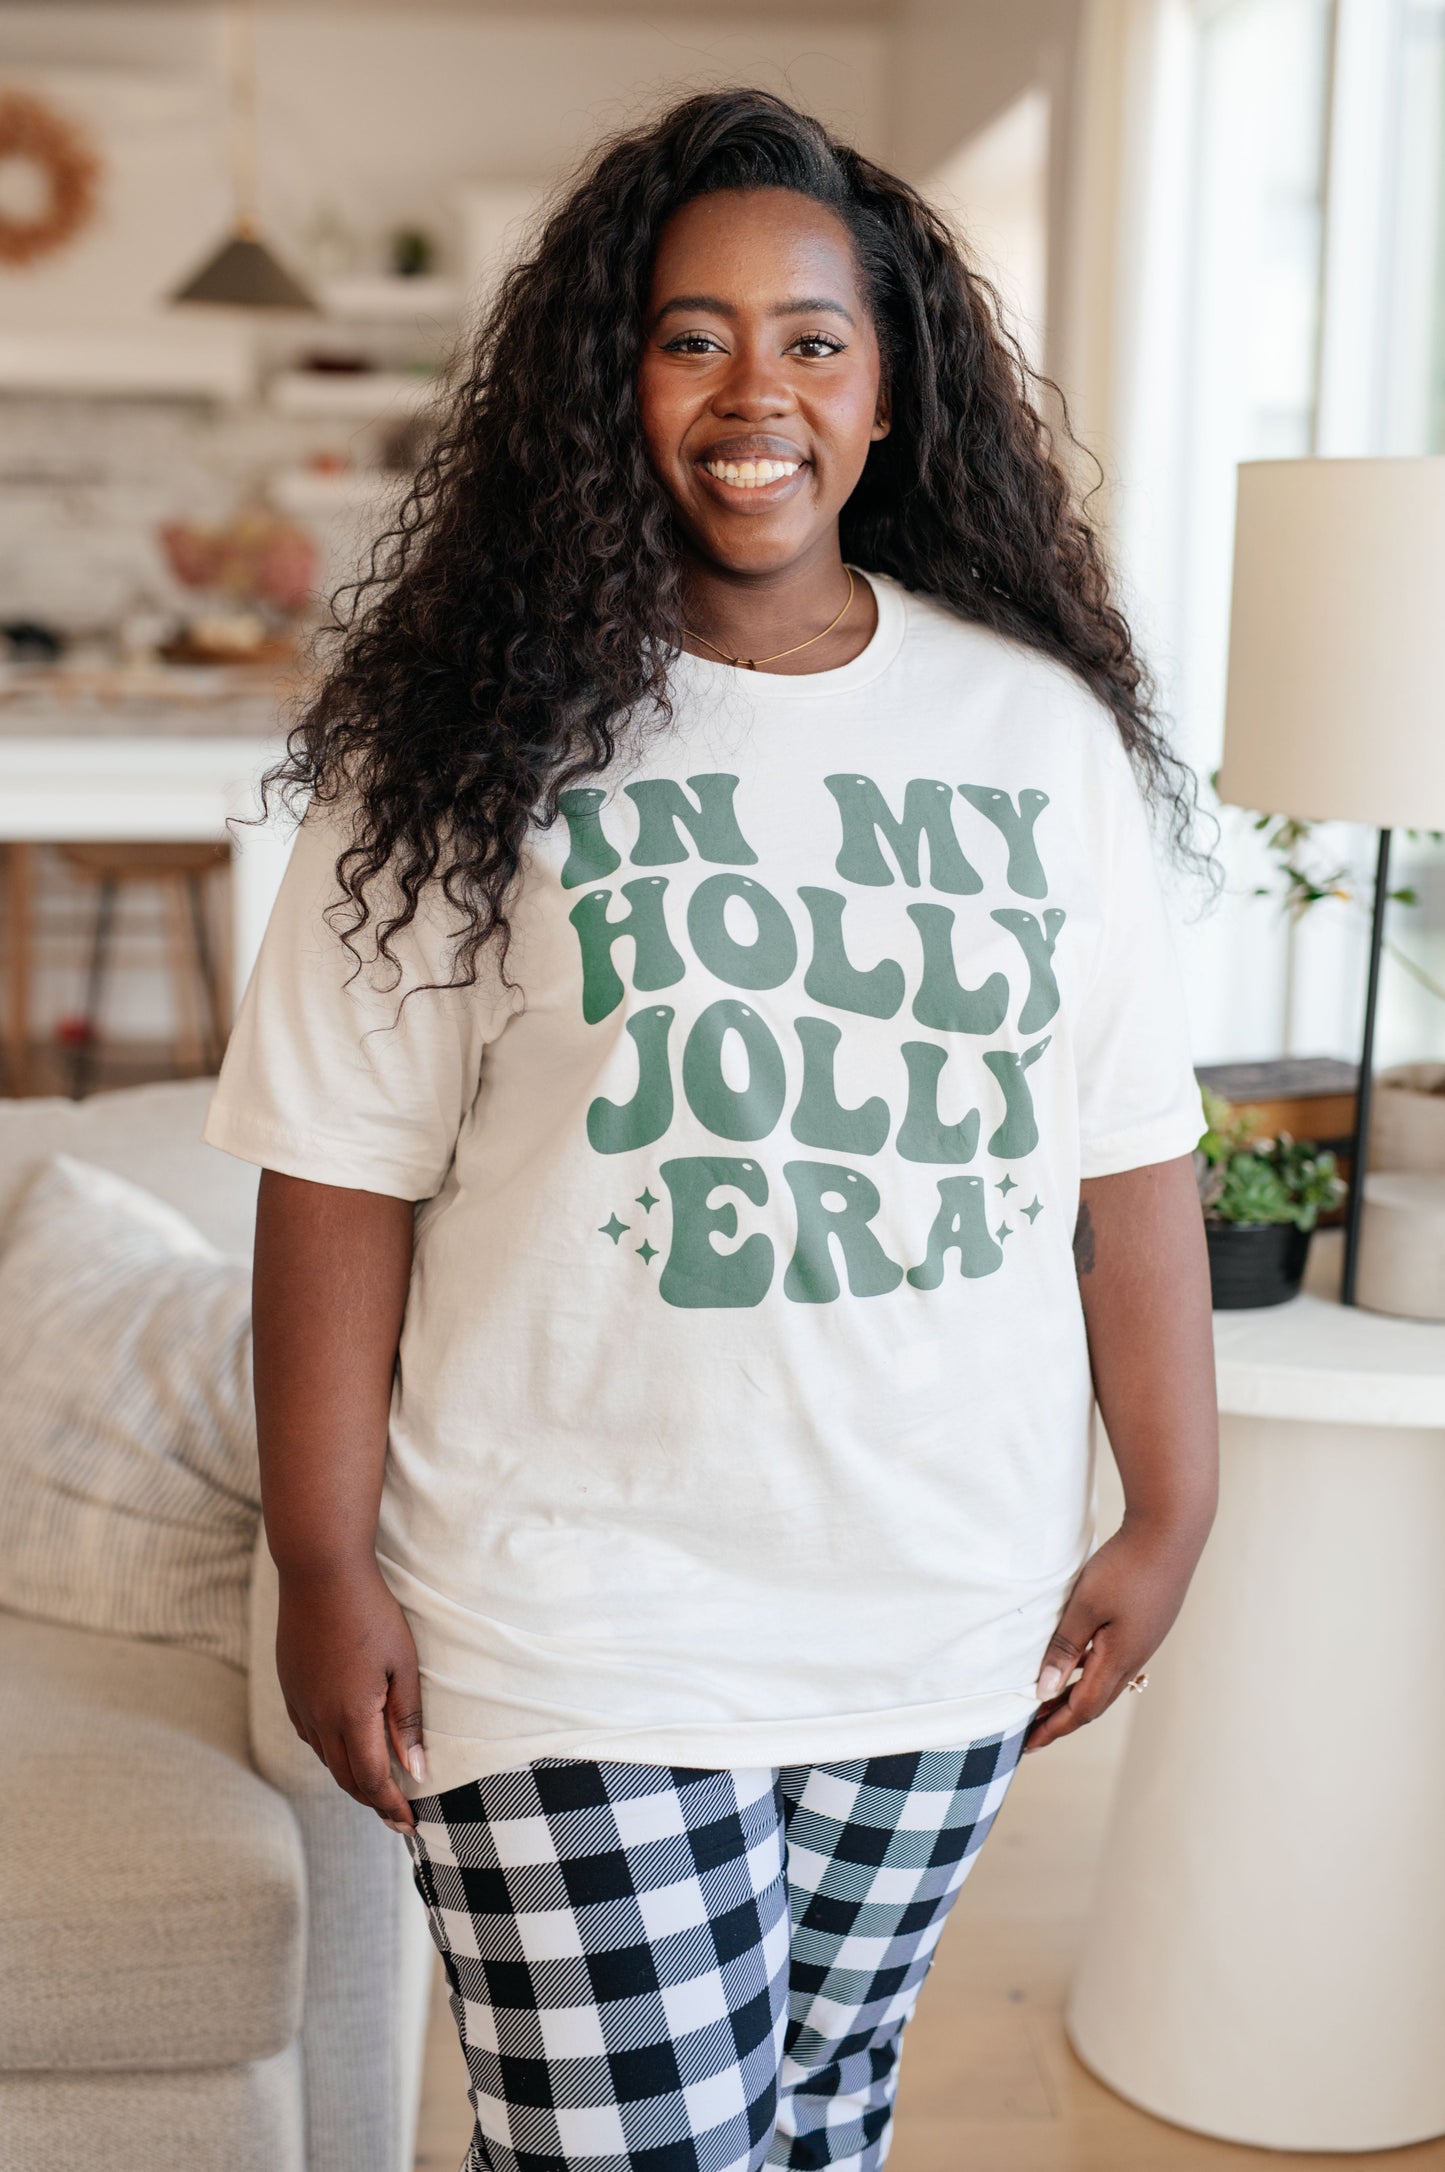 In My Holly Jolly Era Graphic T